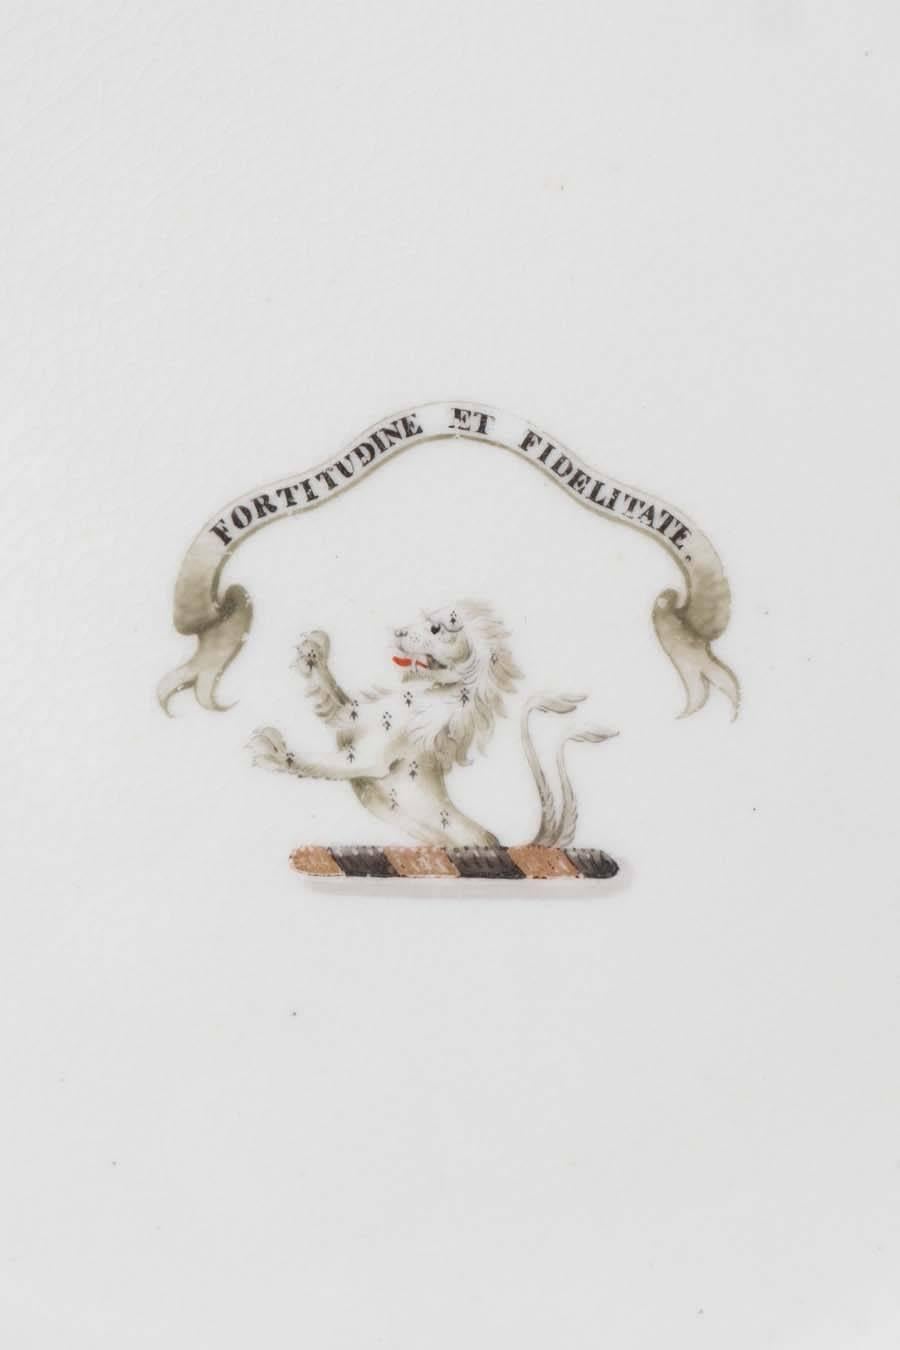 The dishes feature The Crest of Stuckey: A demi-lion rampant issuant, double queueé, Ermine. Showing a lion rampant double queued (with two tails) under the motto: Fortitudine et Fidelitate "With Fortitude and Fidelity."
The recorded